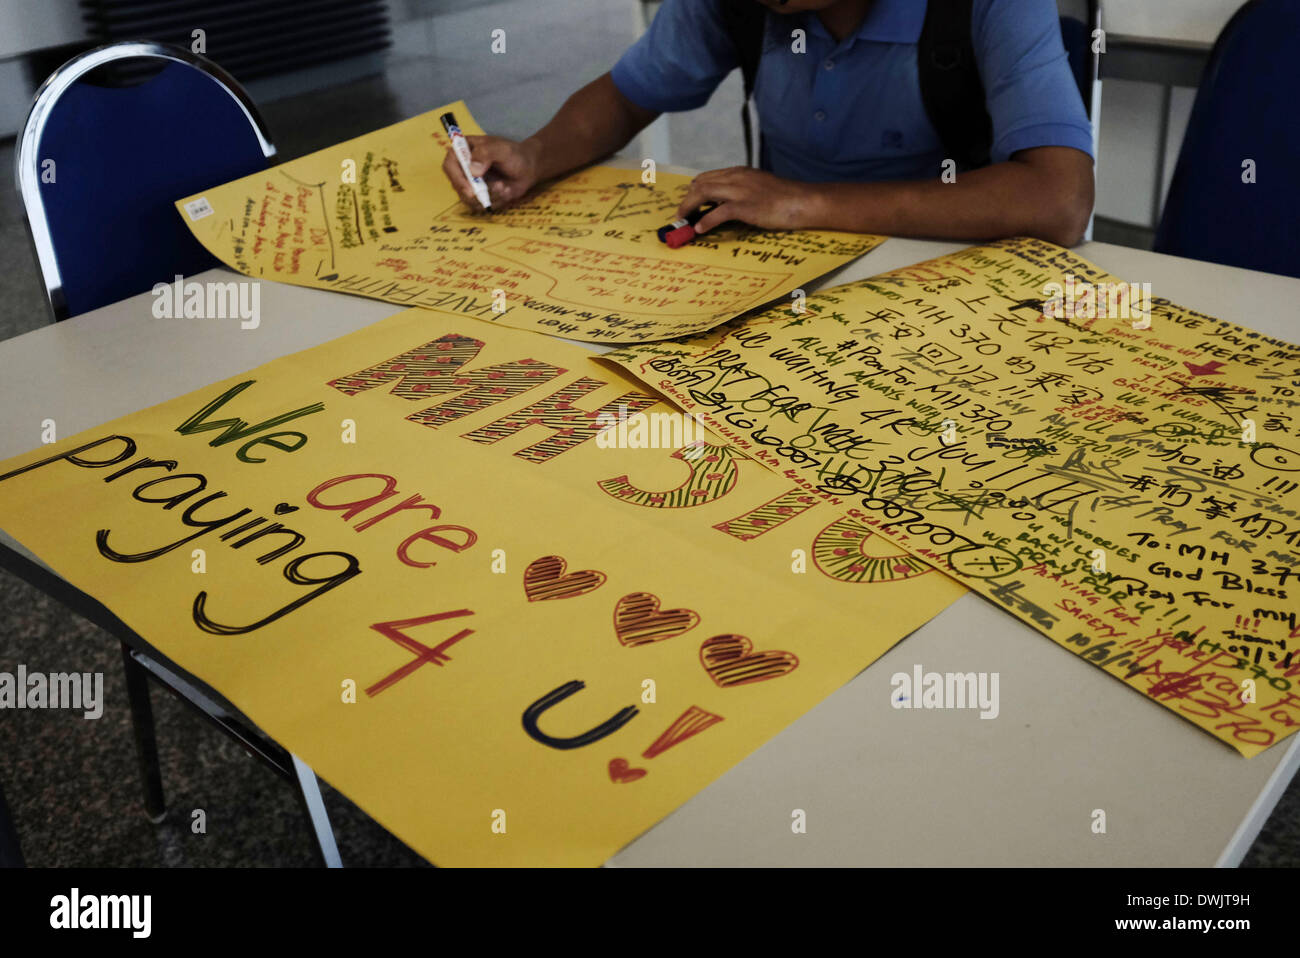 Sepang, SELANGOR, MALAYSIA. 10th Mar, 2014. A man writes a wishing message on a cardboard at Kuala Lumpur International Airport in Sepang. Investigative teams continue to search for the missing Malaysia Airlines flight MH370 and the 293 passengers that were travelling from Kuala Lumpur to Beijing. The airliner was reported missing on March 8, after it failed to check in as scheduled. © Kamal Sellehuddin/ZUMAPRESS.com/Alamy Live News Stock Photo